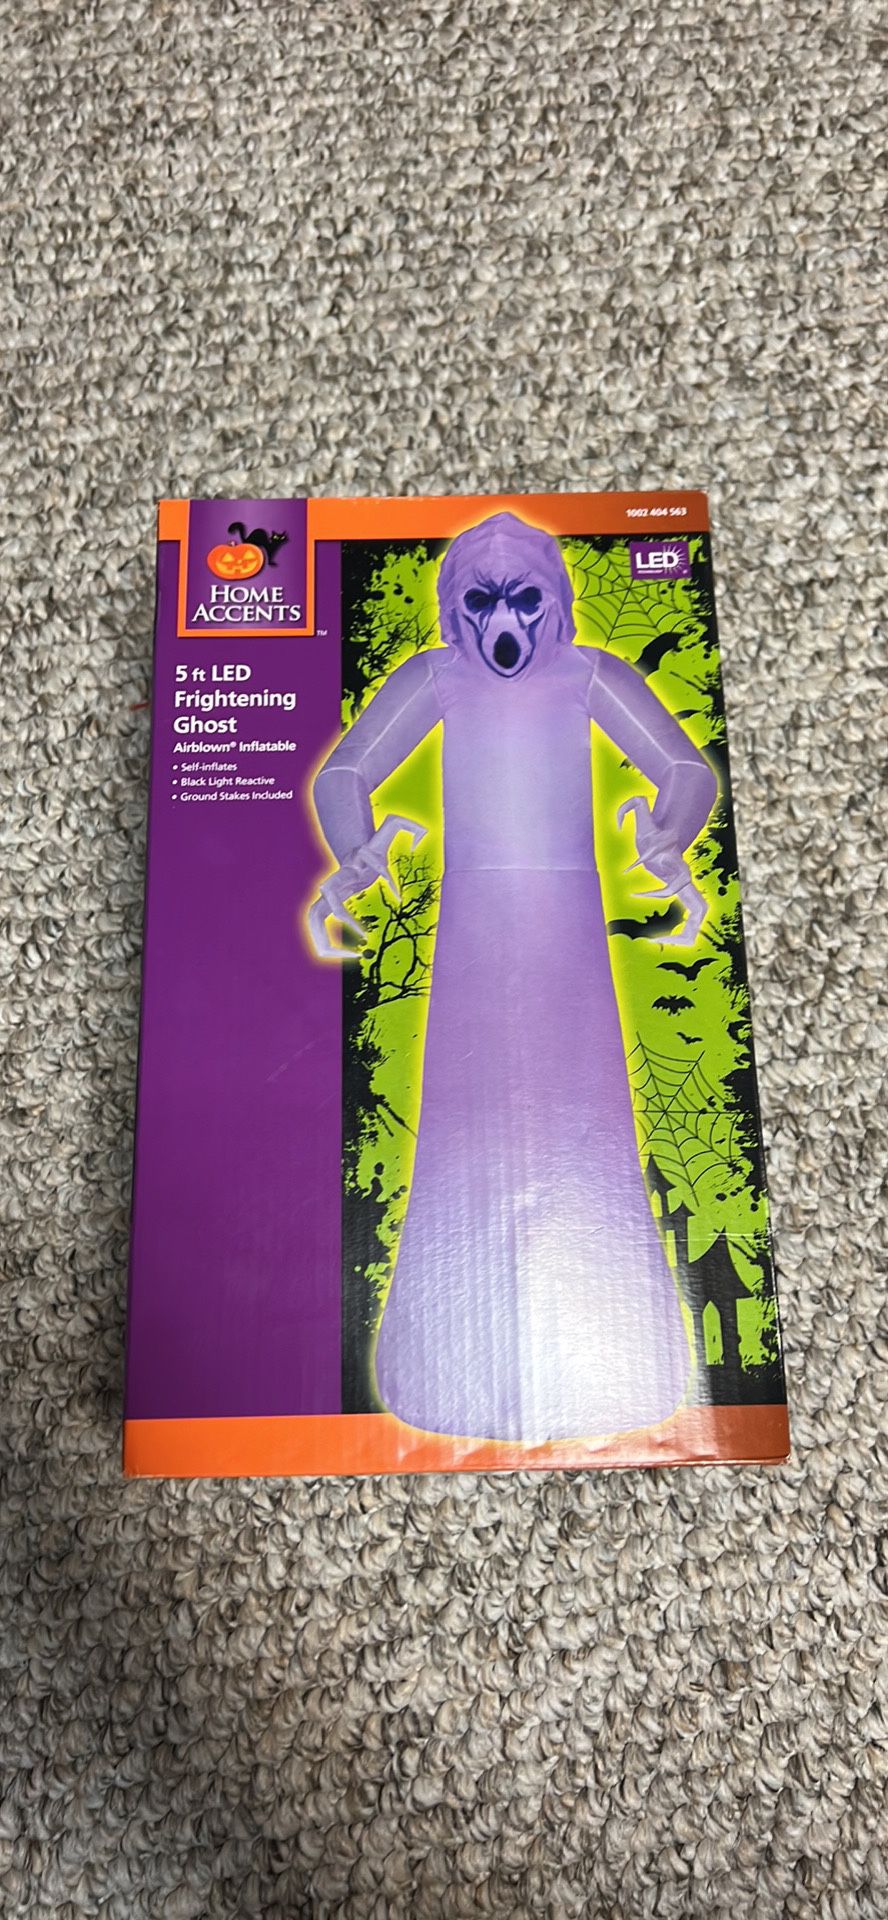 5 FOOT LED FRIGHTENING GHOST INFLATABLE 